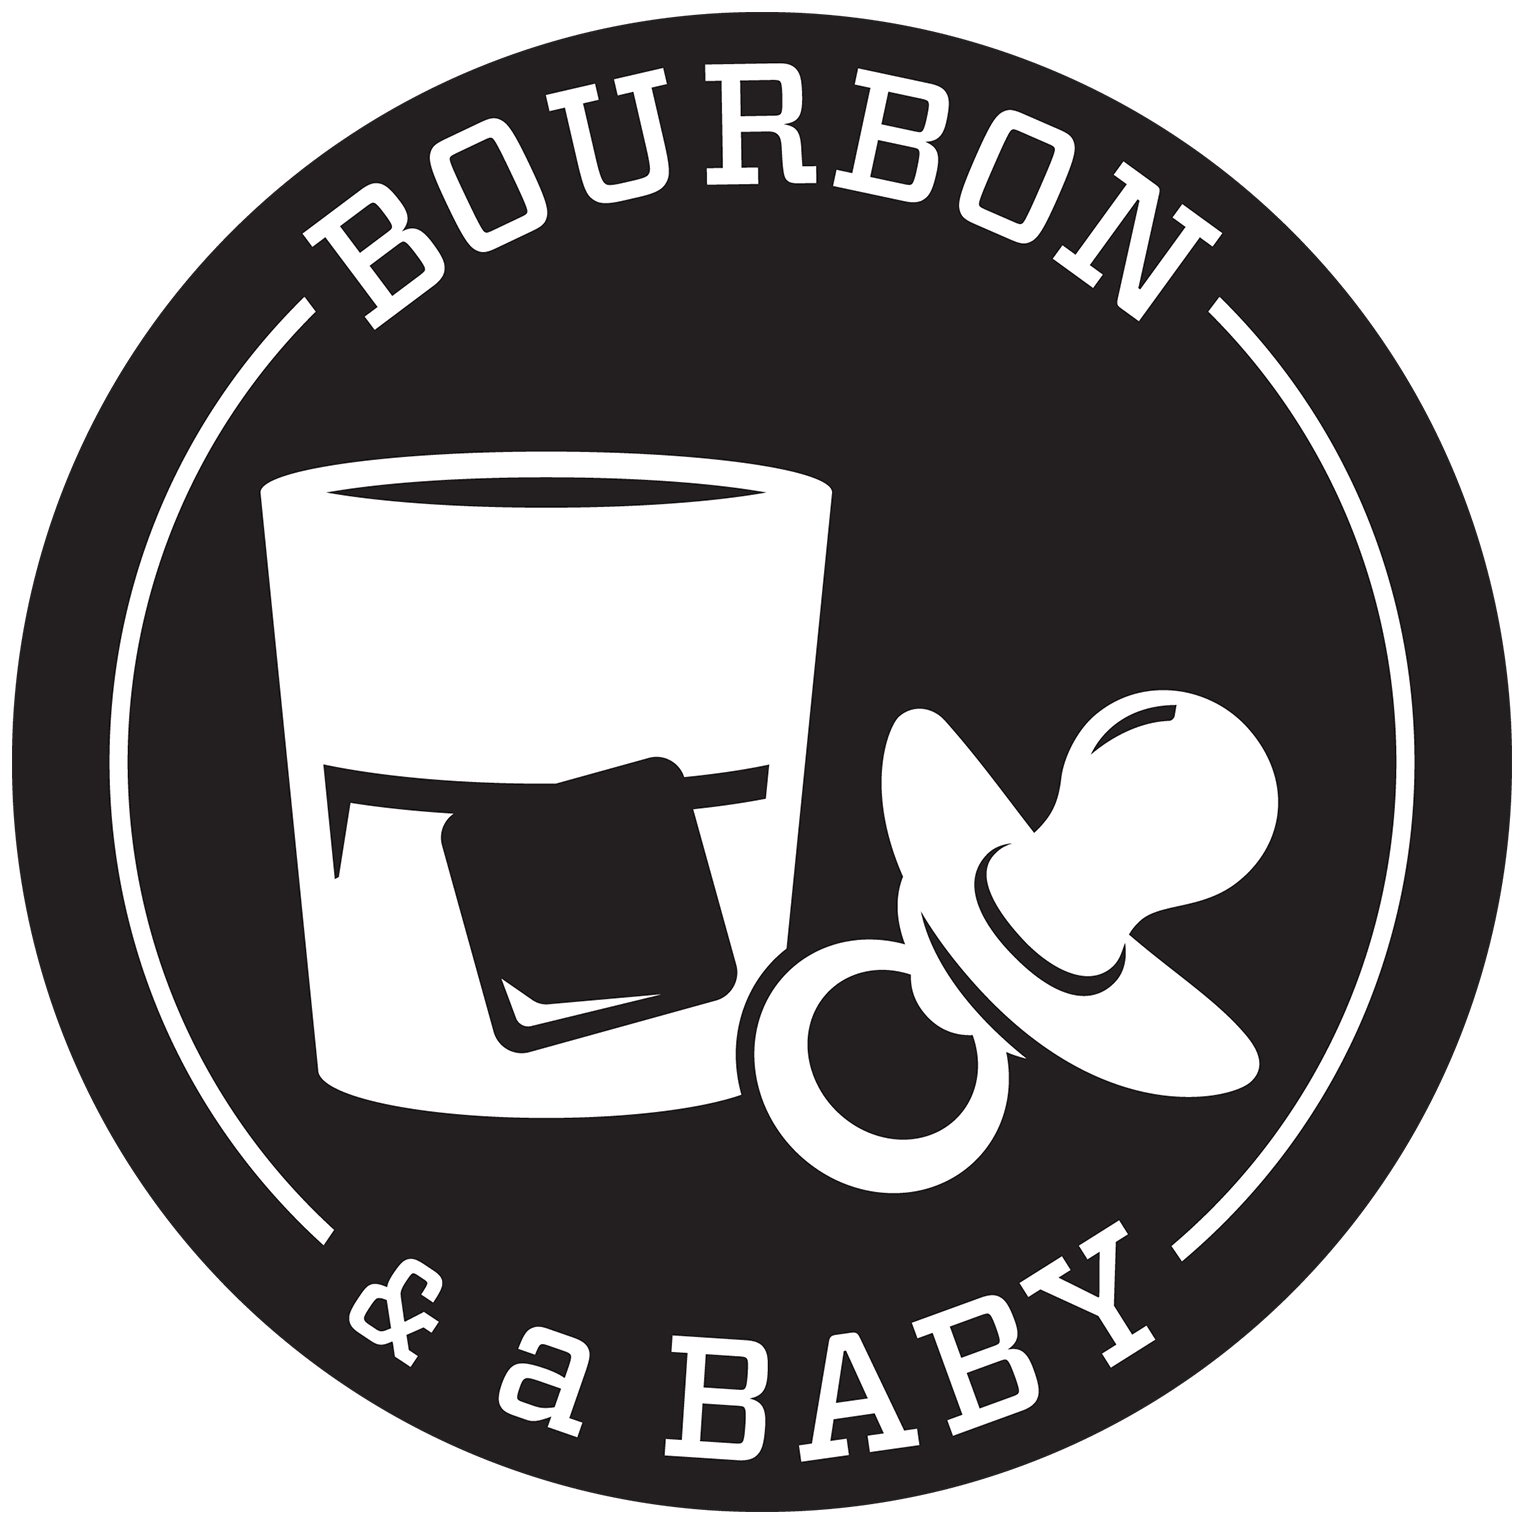 Jay is a bourbon enthusiast, a new (old) dad, and a work-from-home dad! Max is the cutest baby boy the world has ever seen! Subscribe to their YouTube channel.